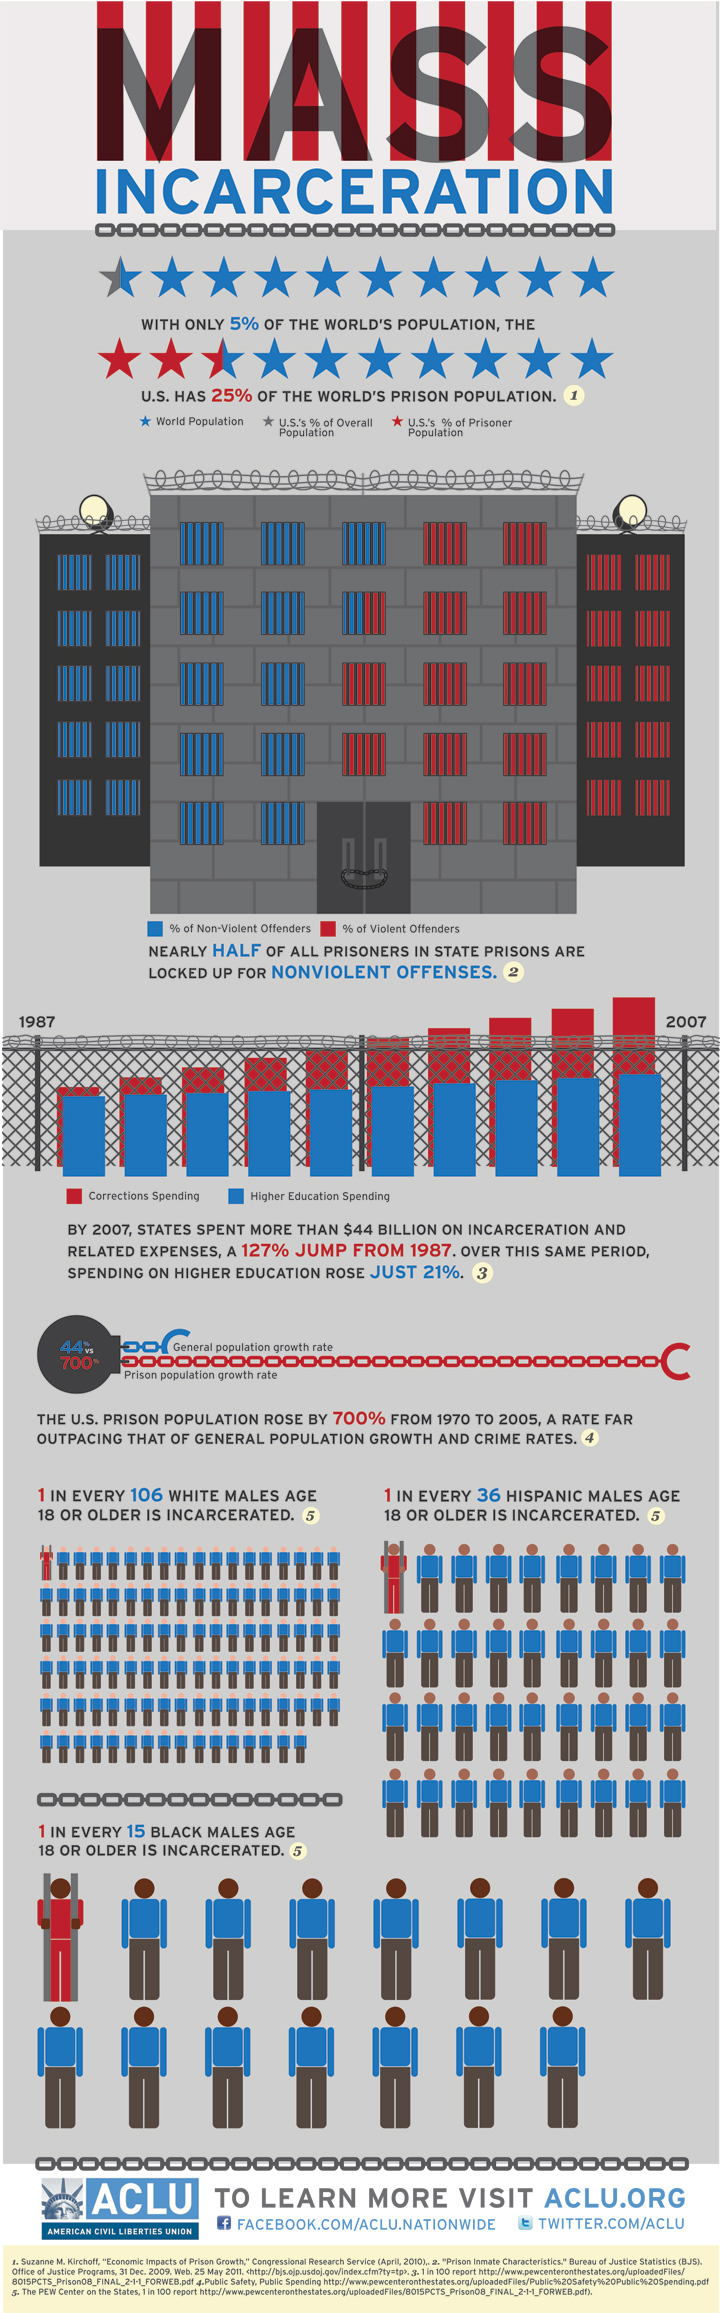 Infographic on mass incarceration from the ACLU